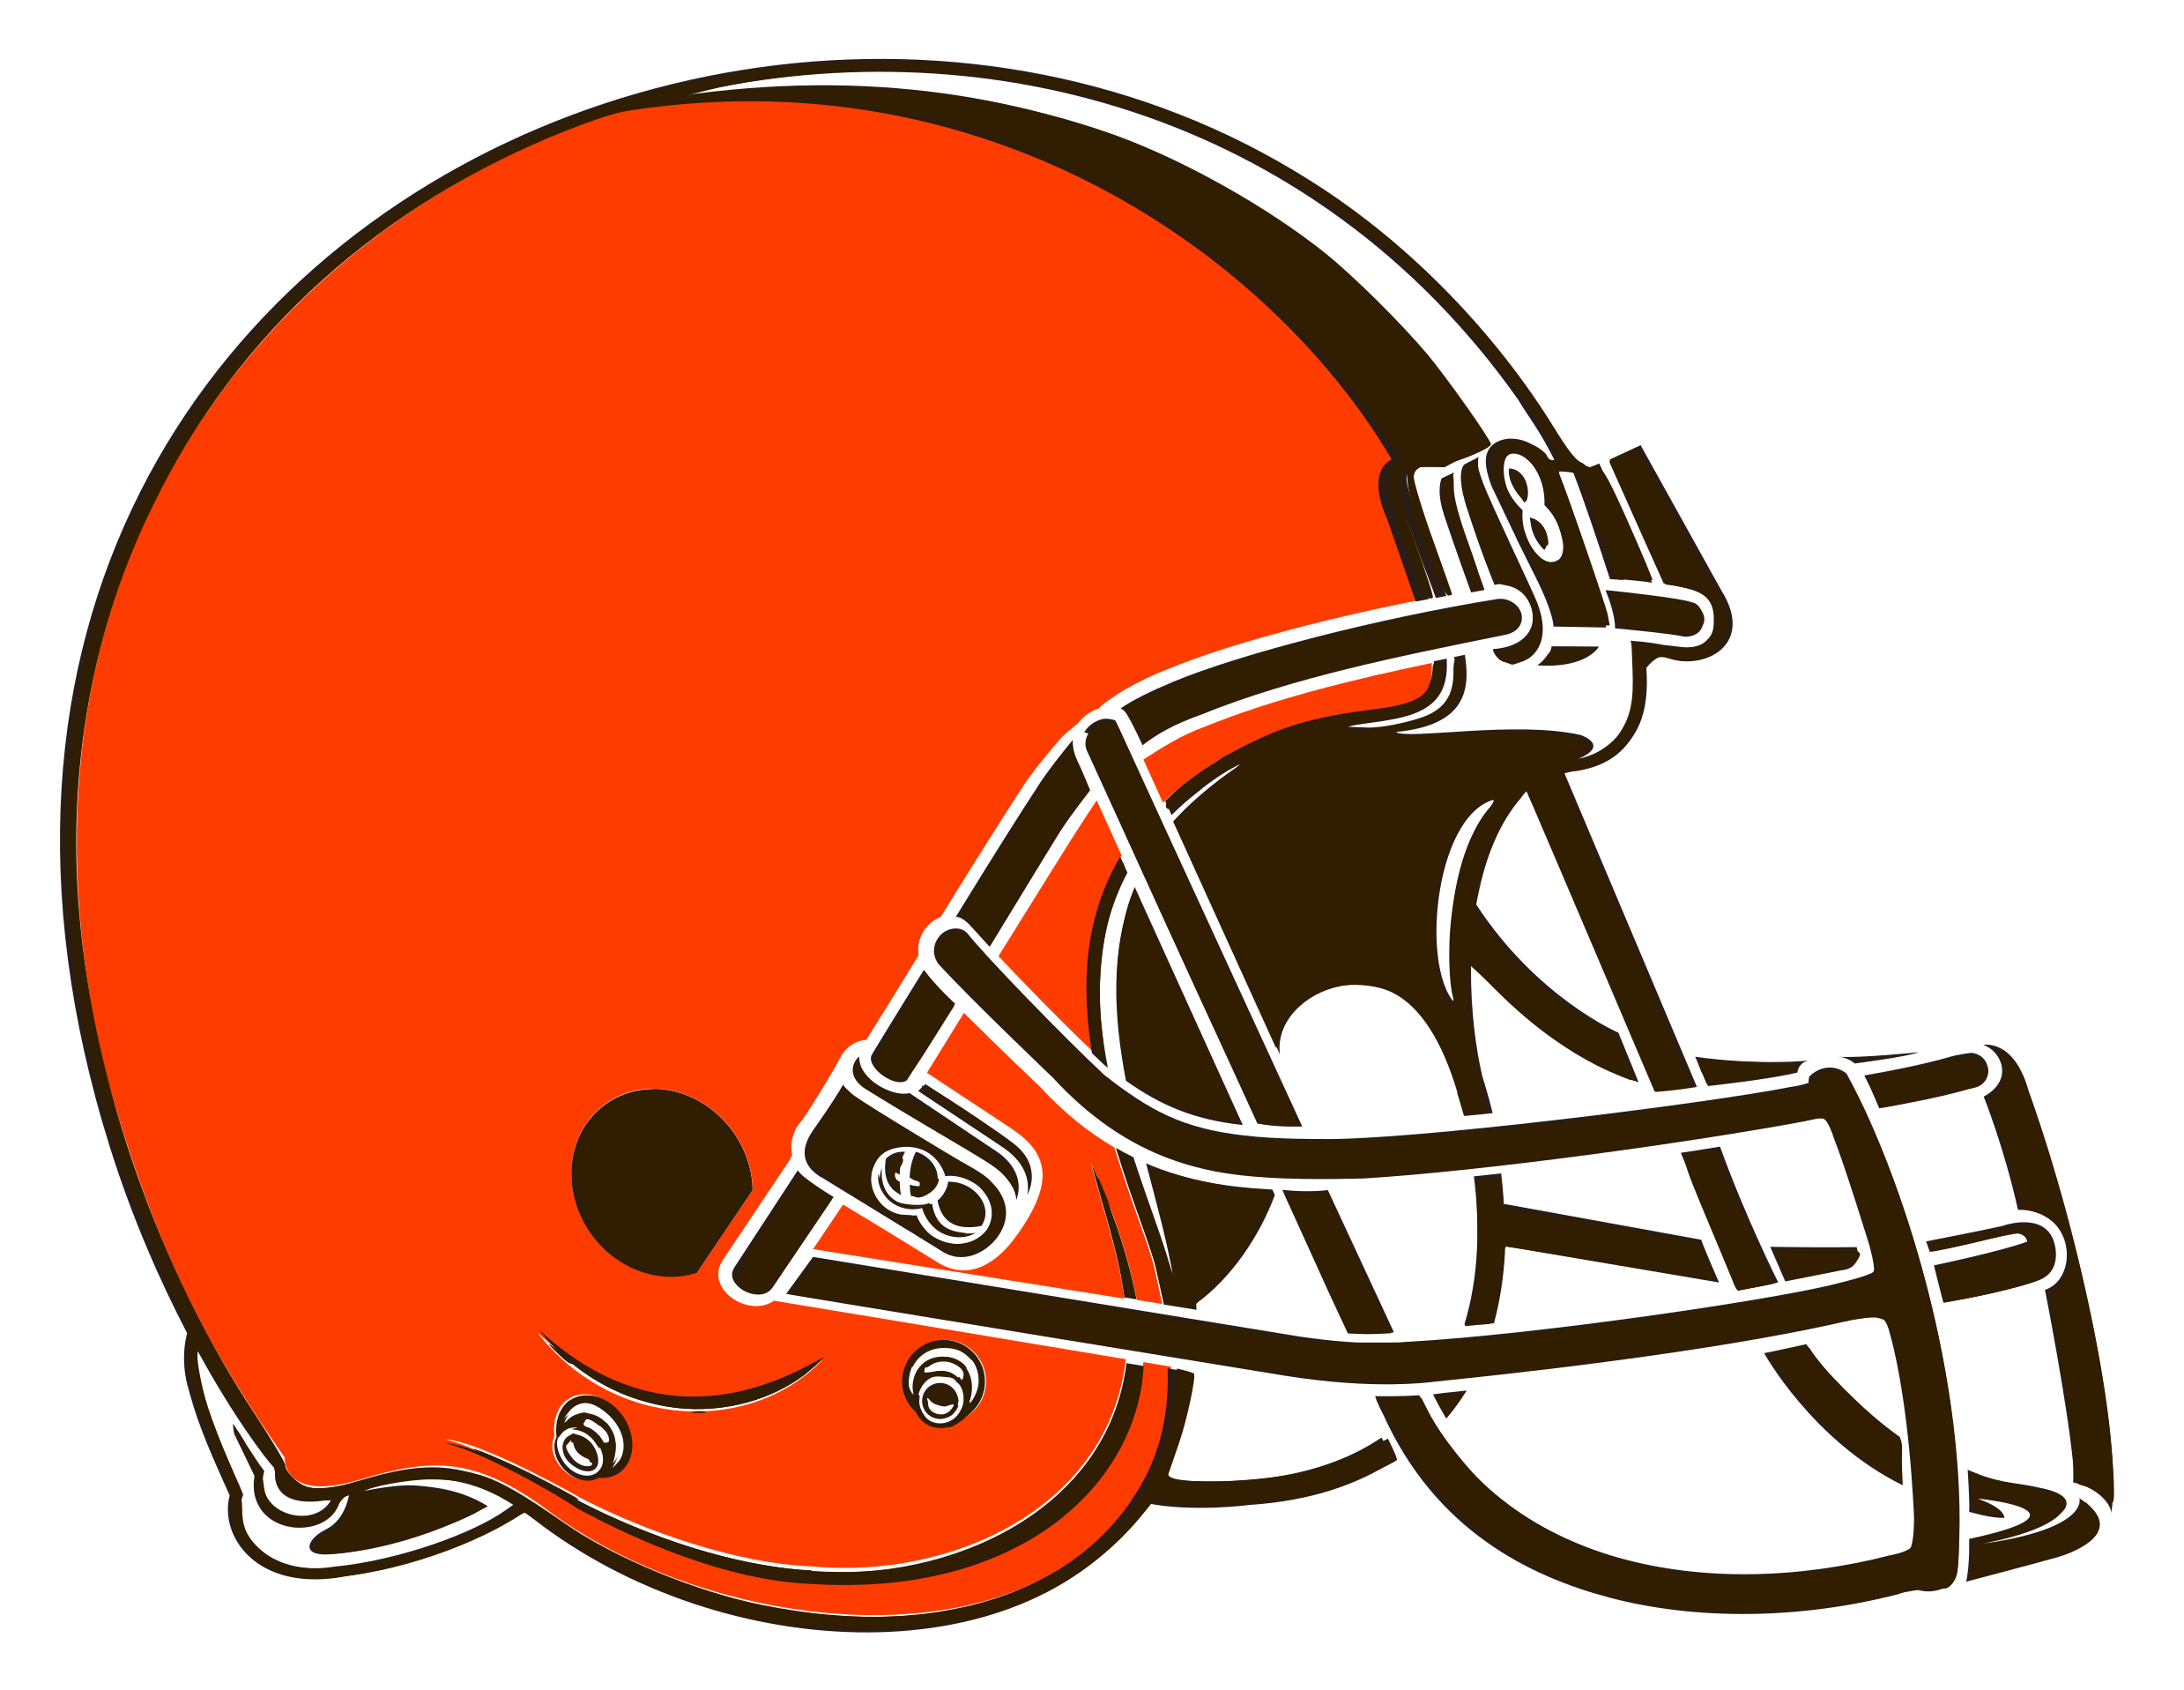 Full Resolution - Cleveland Browns Logo (2485x1920)